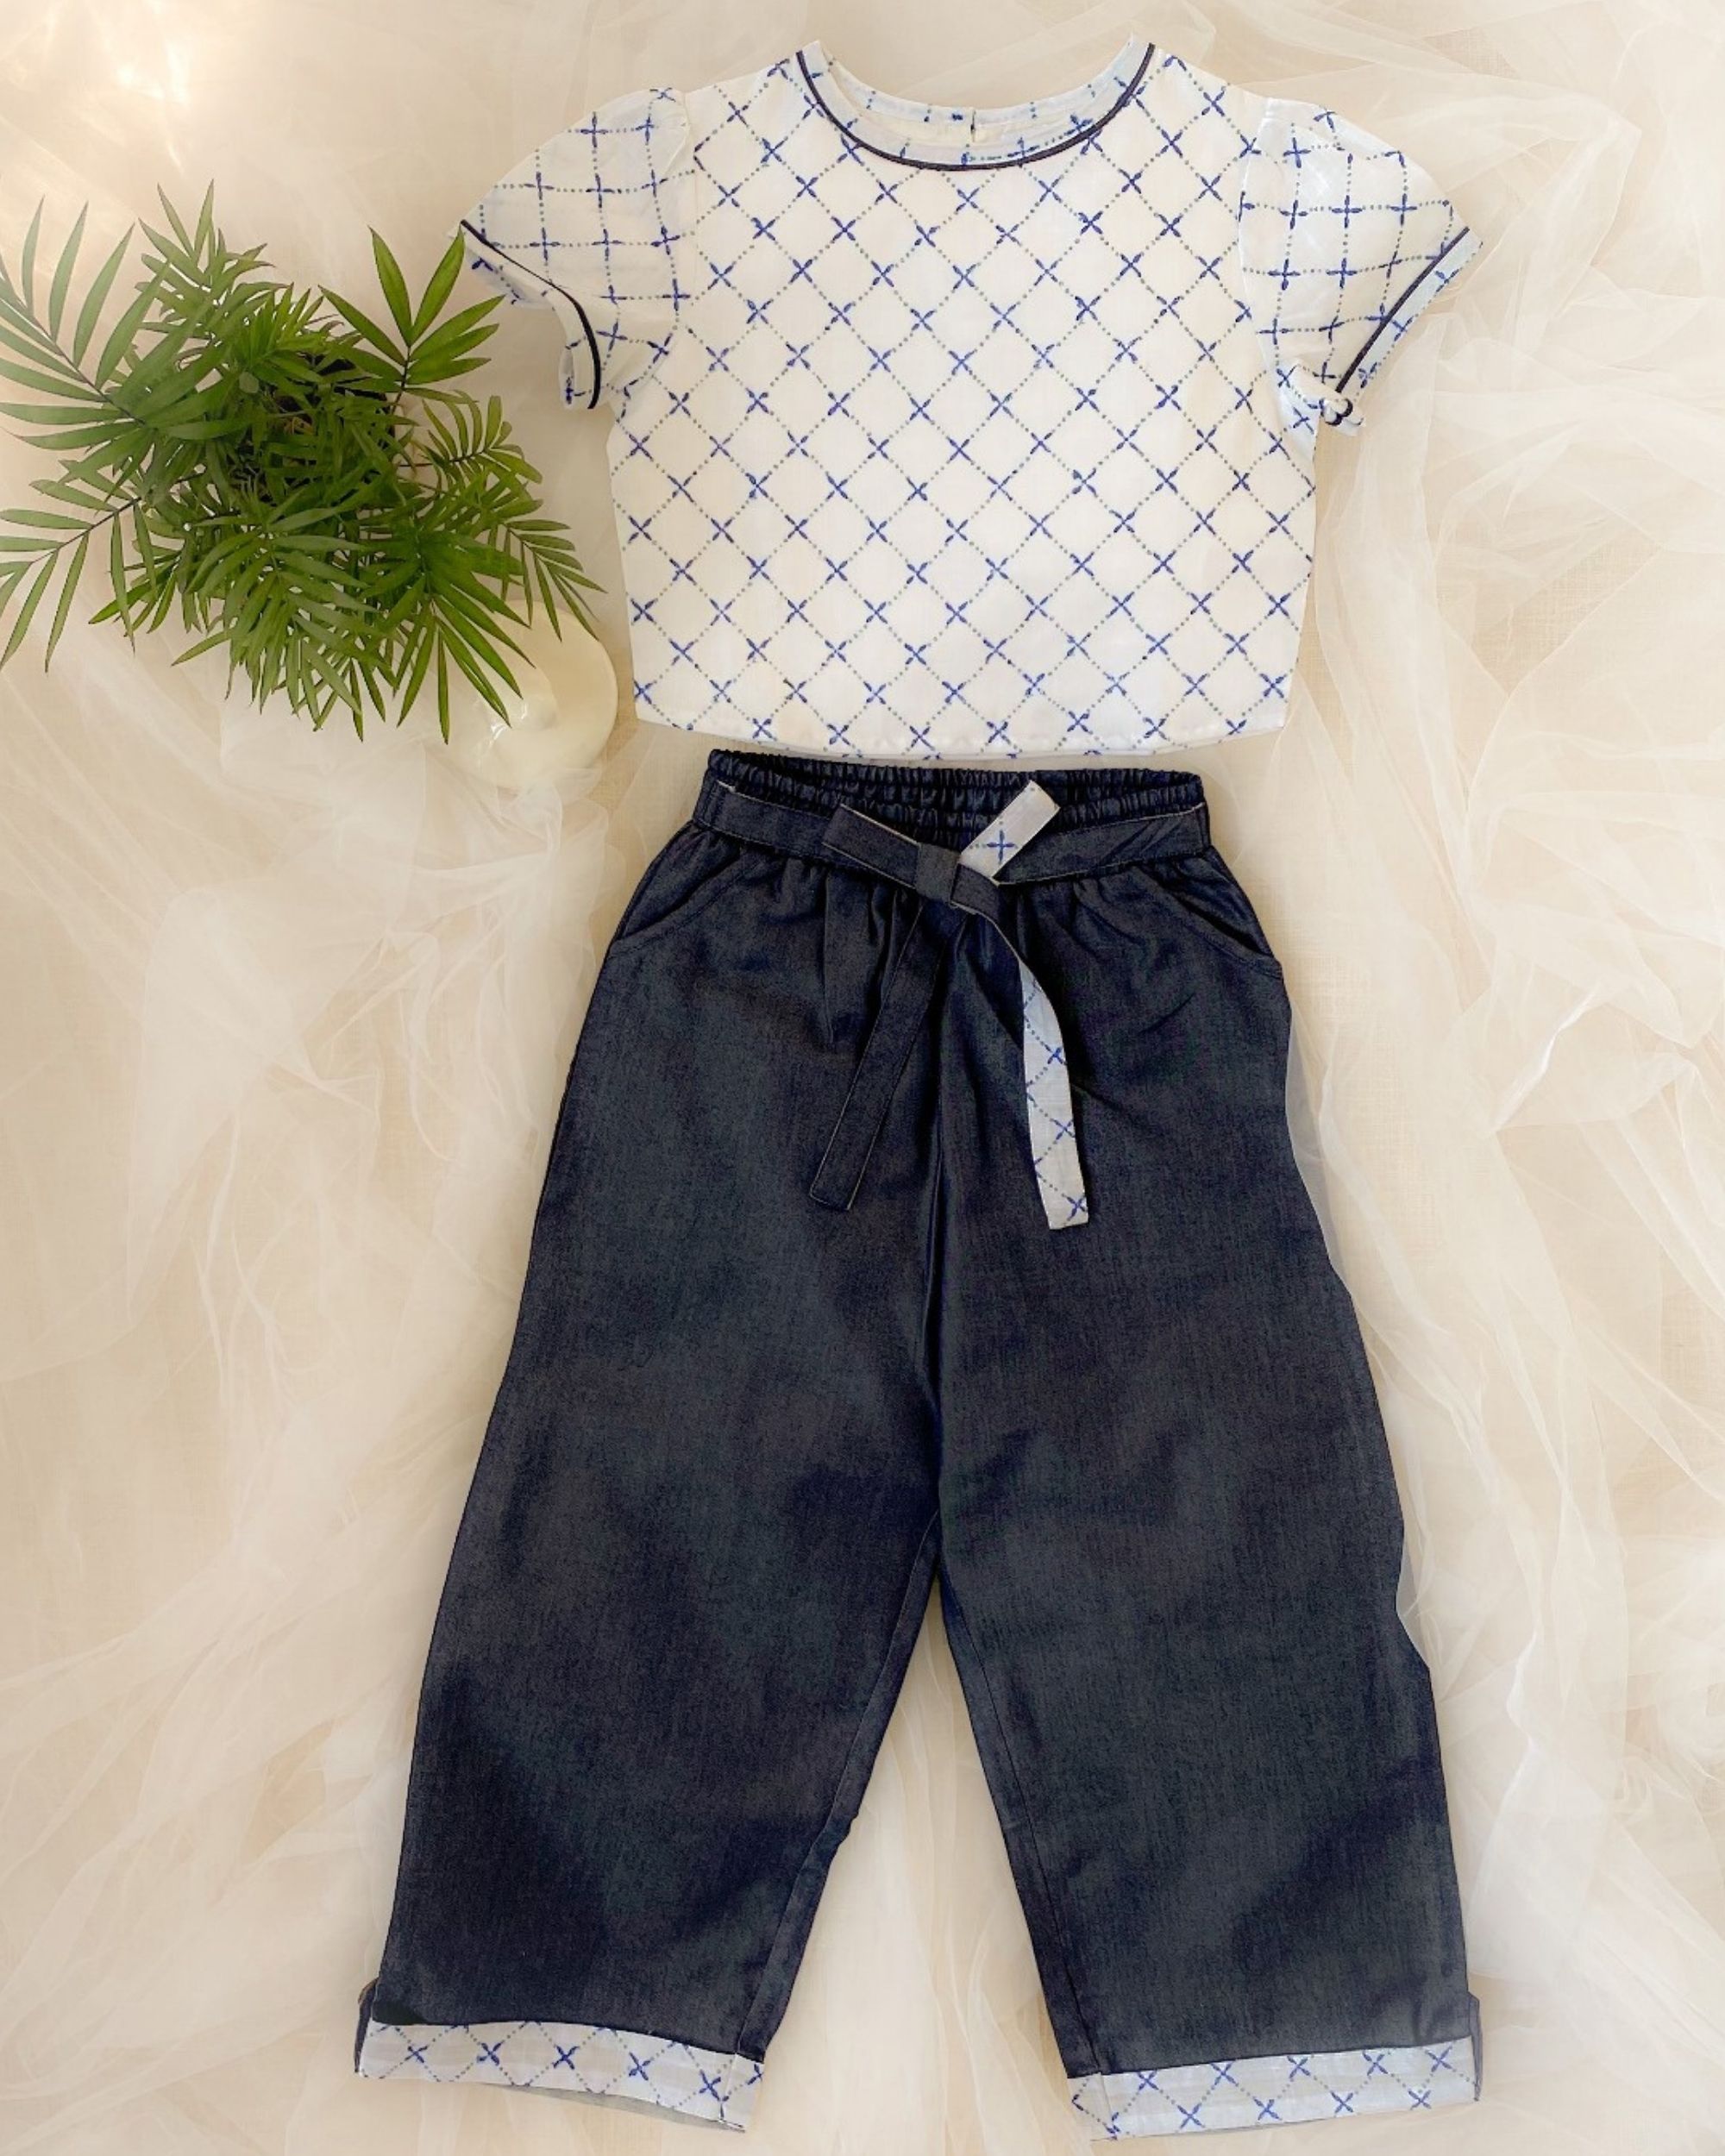 White printed top and denim pants - set of two